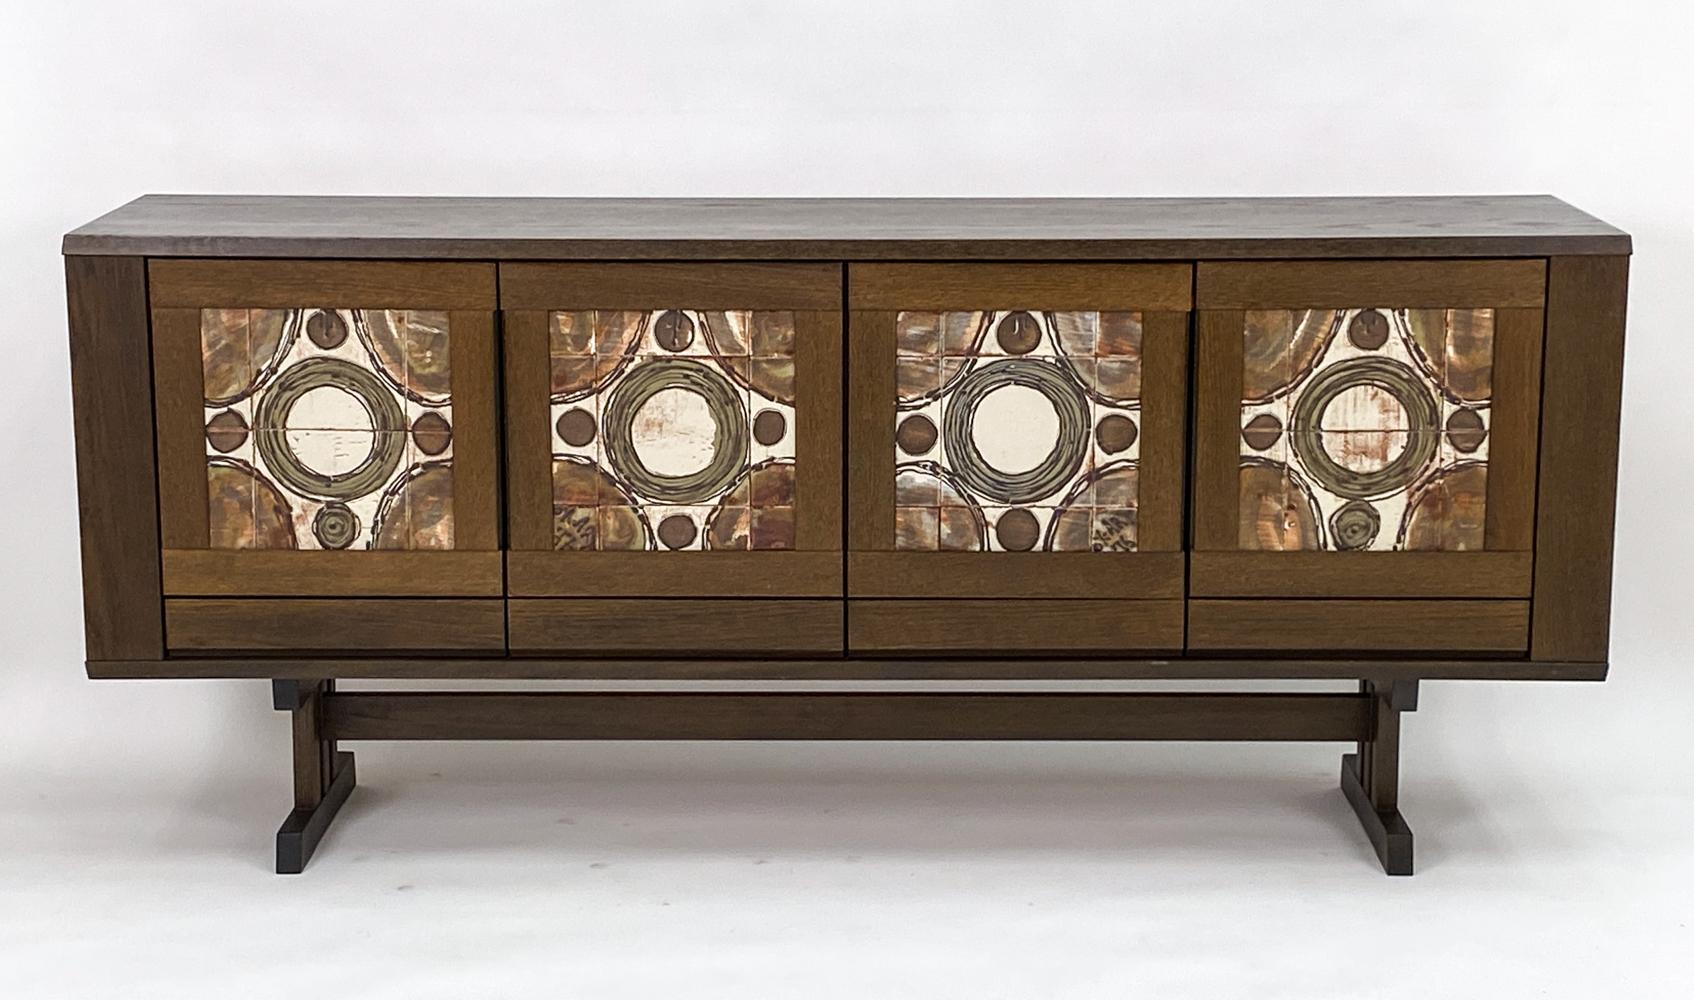 This is a fabulous trestle base sideboard in rich, dark stained oakwood made by Skovby, circa 1970s. This piece features ceramic abstract neutral earth-toned design 